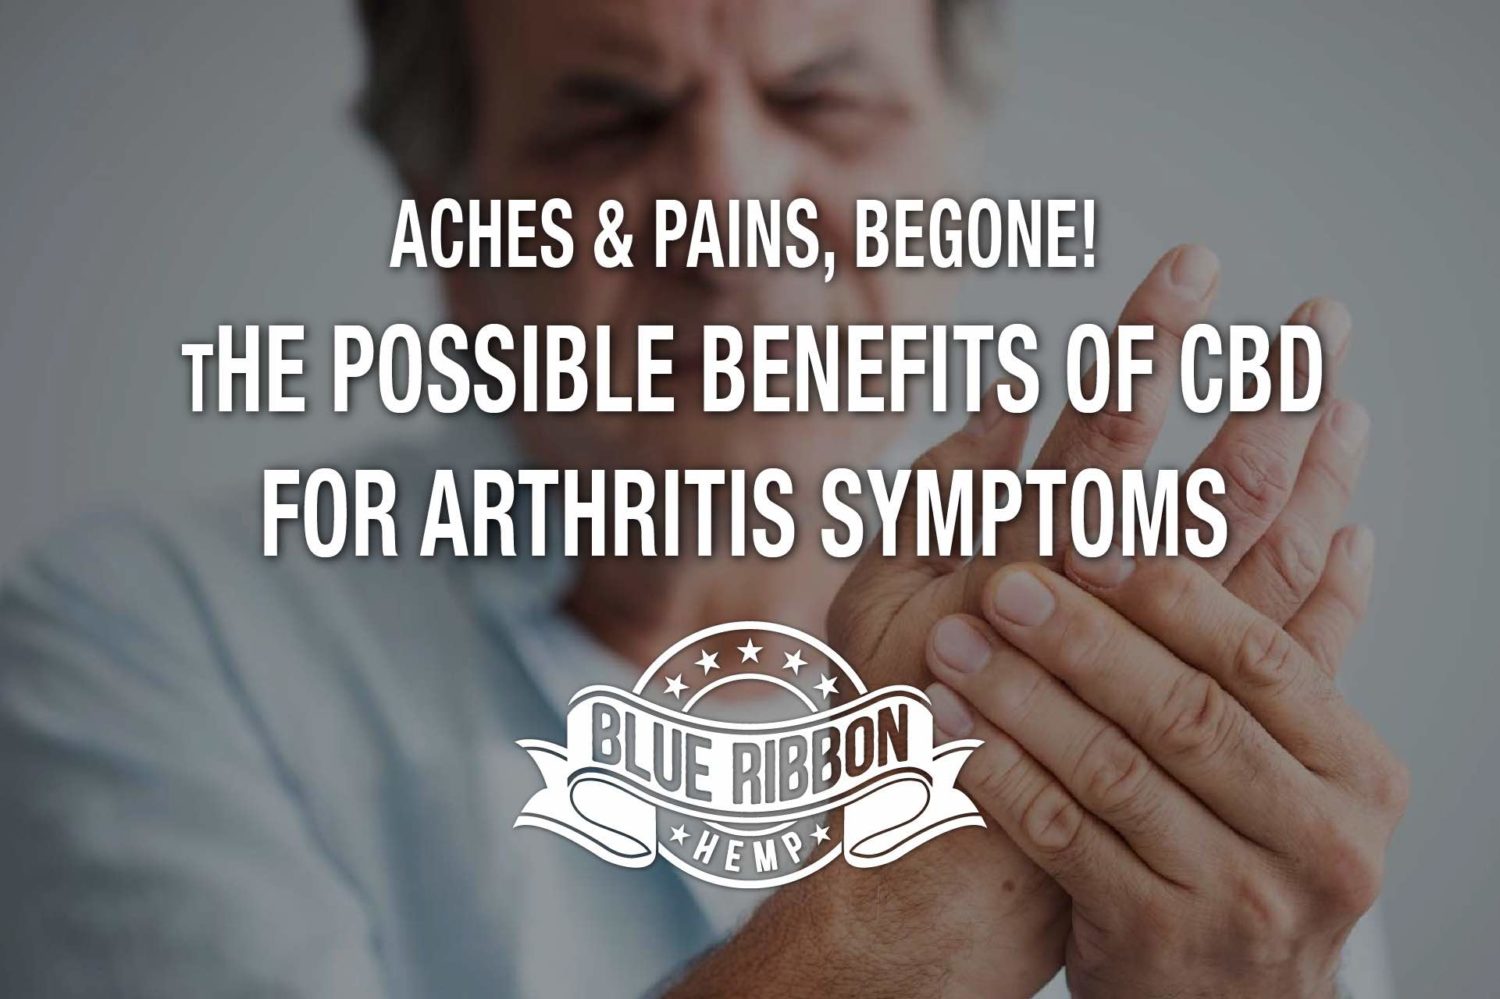 Aches & Pains, Begone! — The Possible Benefits Of CBD For Arthritis Symptoms  – LA Weekly